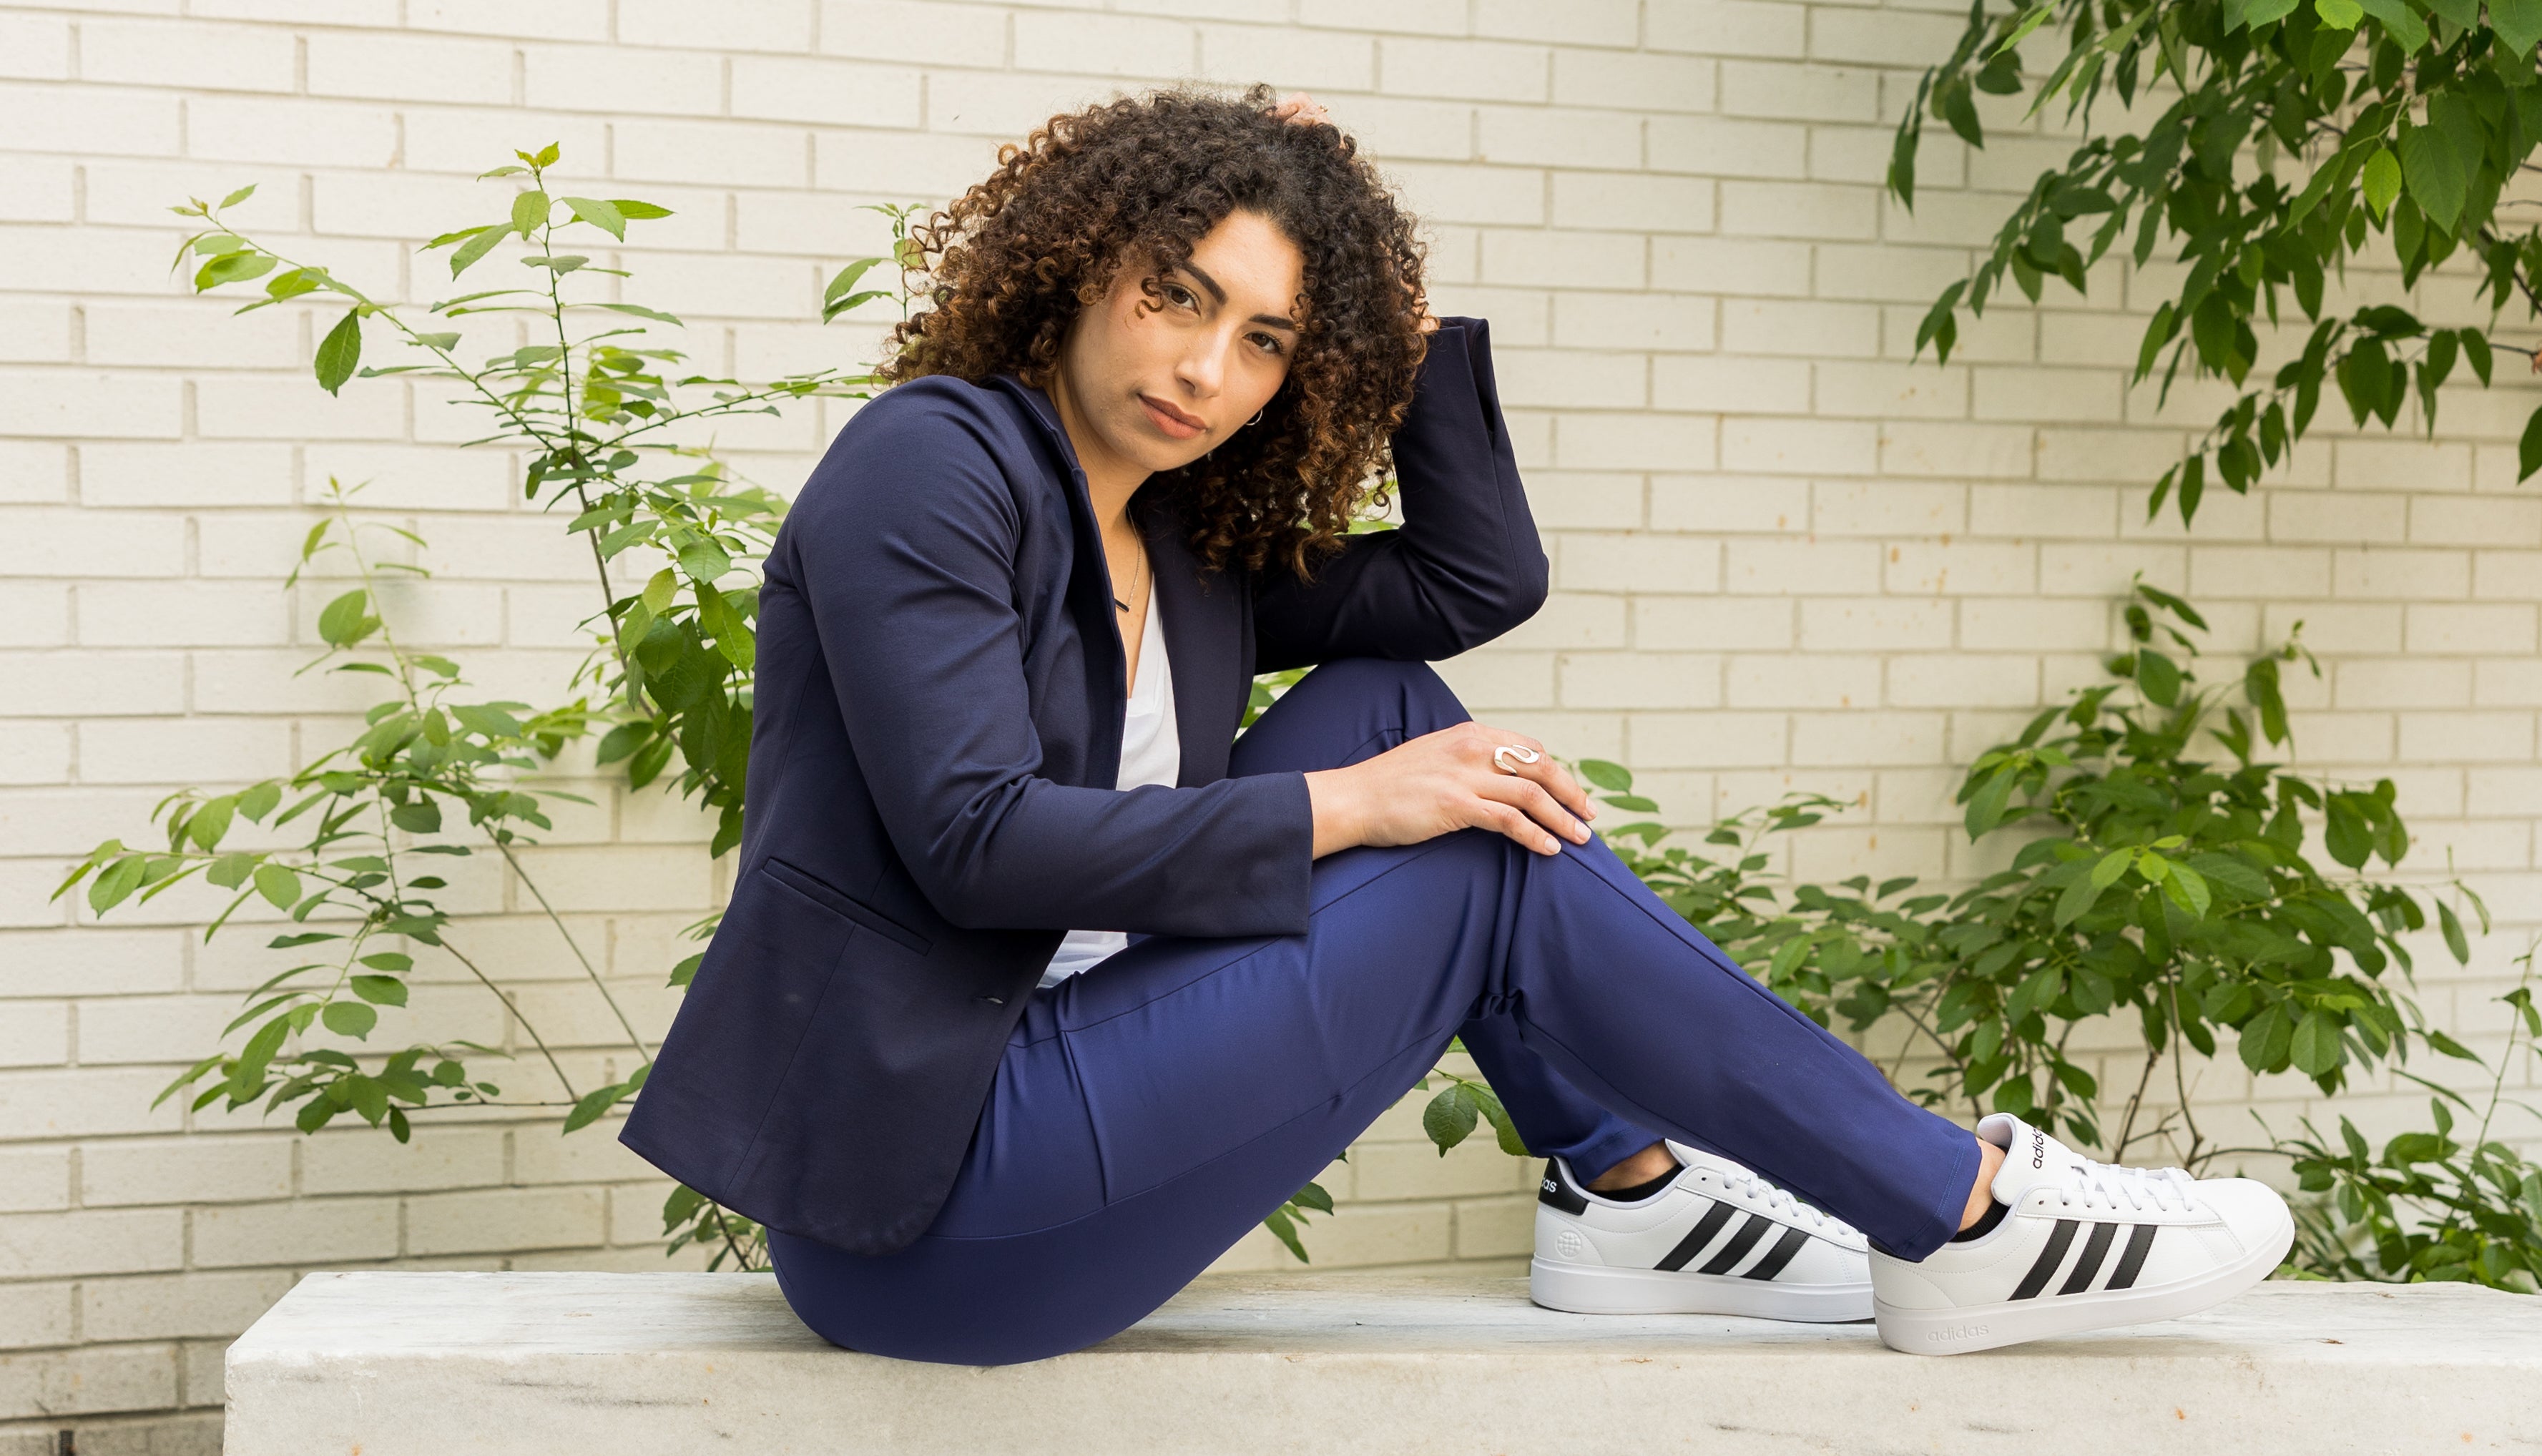 Fashionable woman in a tailored blazer and trousers, posing in a modern, minimalist setting, highlighting SISU's commitment to flexible, elegant wardrobes.